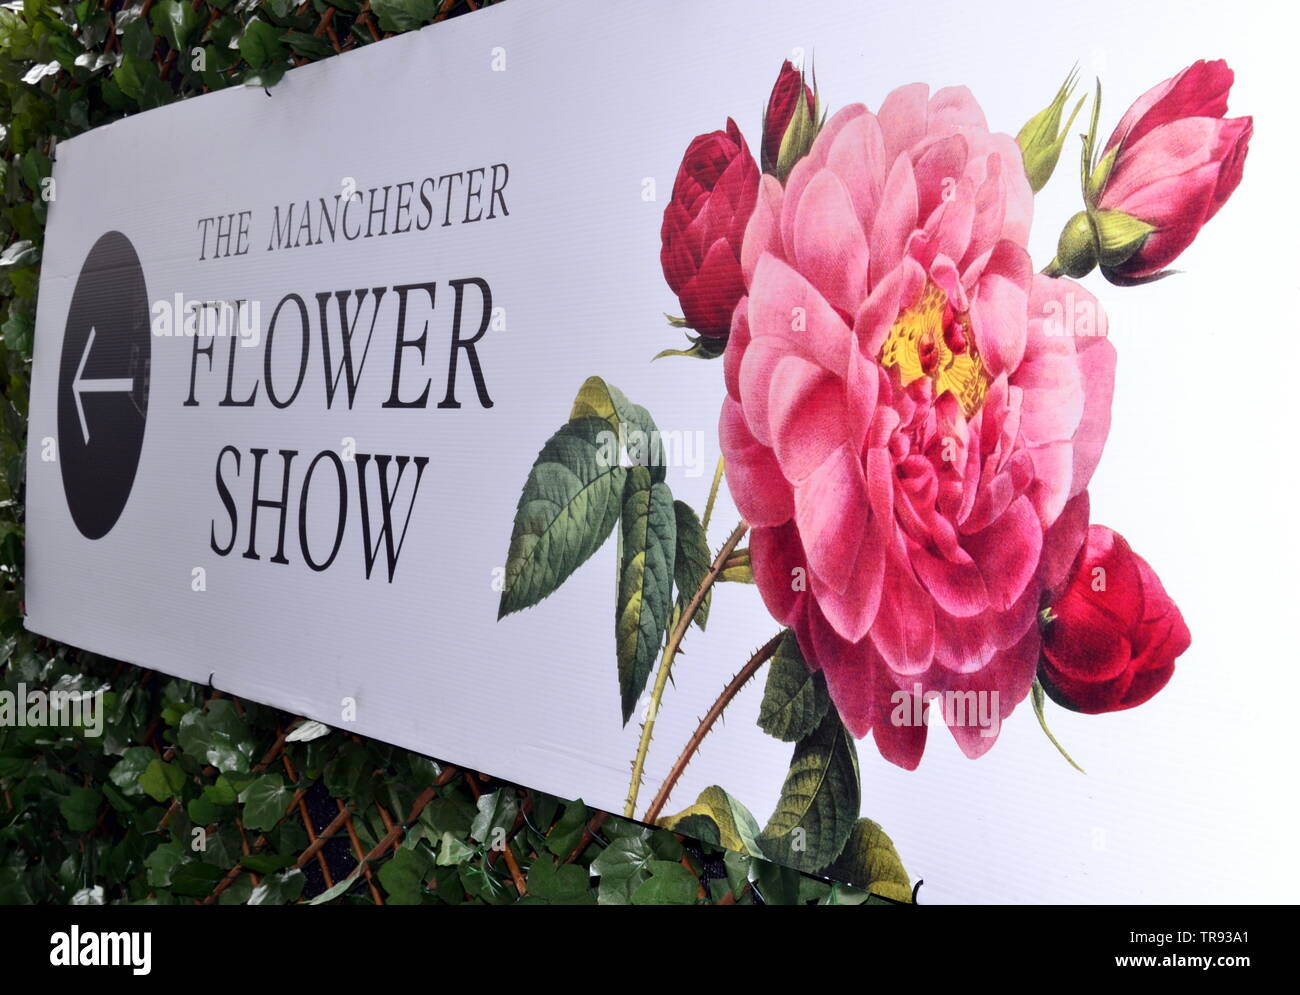 The Manchester Flower Show, part of Manchester's King Street  Festival on June 1st - 2nd, 2019, prepares to open. This year’s theme:Flower Power! Stock Photo